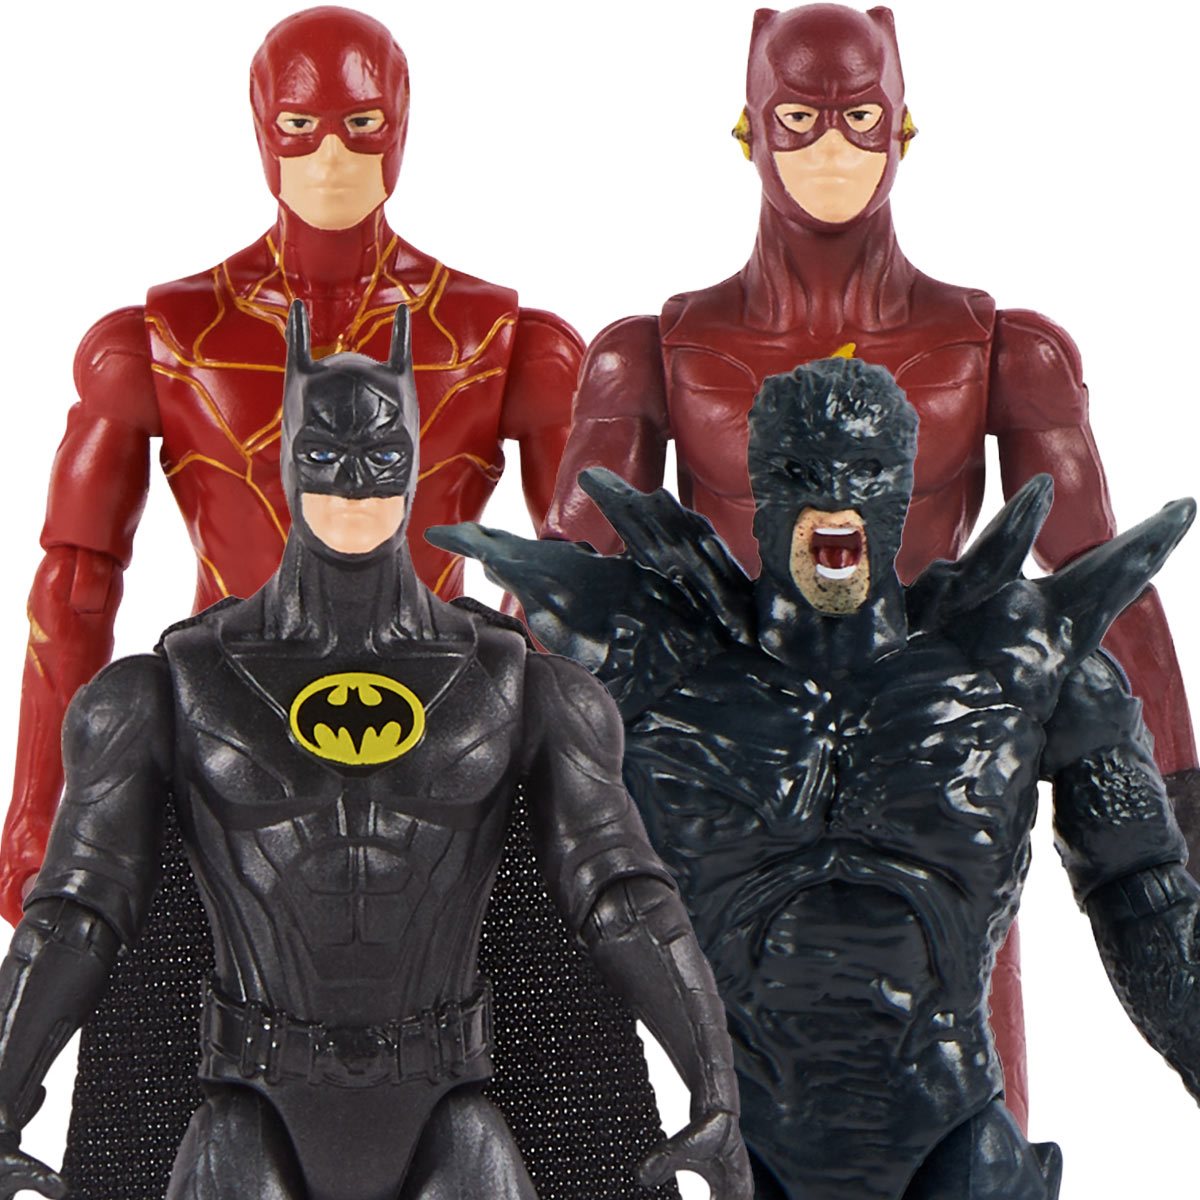 The Flash 4-inch Action Figure Assortment Case of